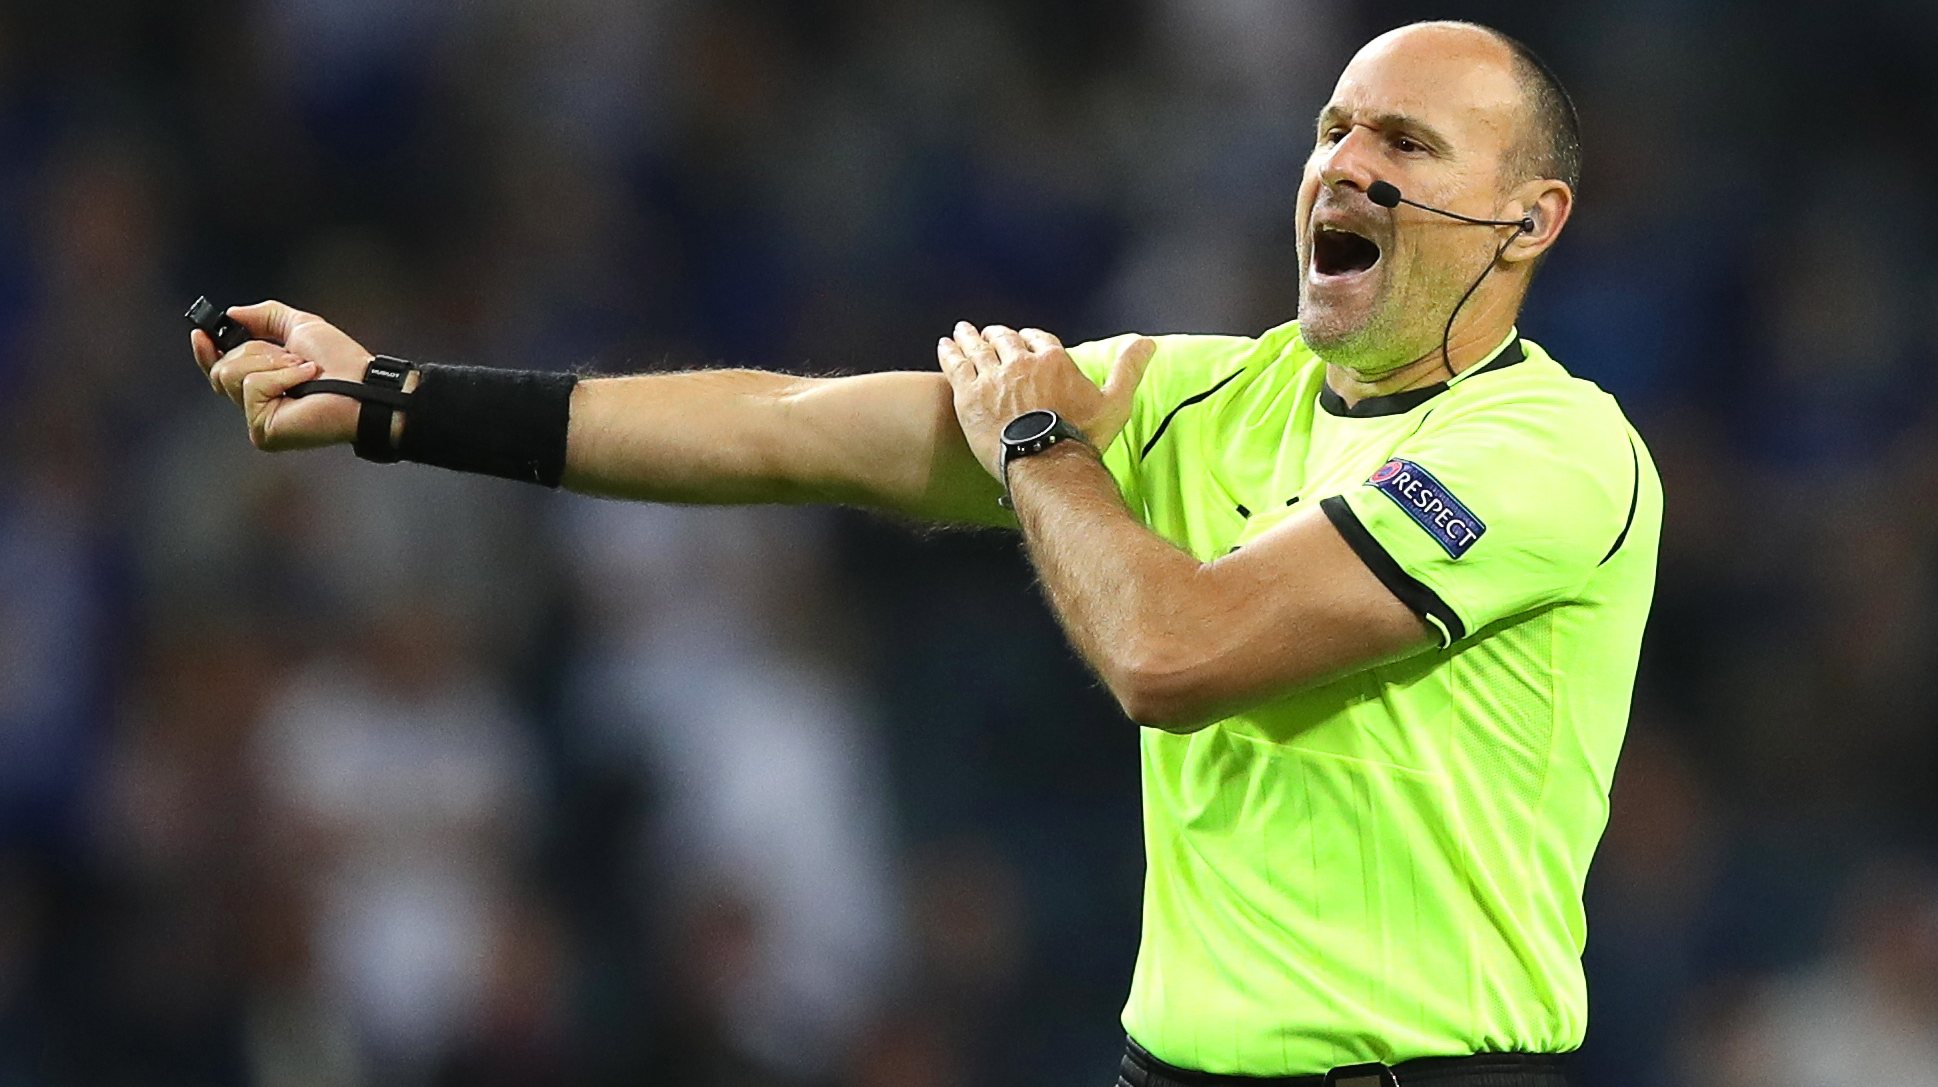 epa09235873 Spanish referee Antonio Mateu Lahoz gestures during the UEFA Champions League final between Manchester City and Chelsea FC in Porto, Portugal, 29 May 2021.  EPA/Jose Coelho / POOL